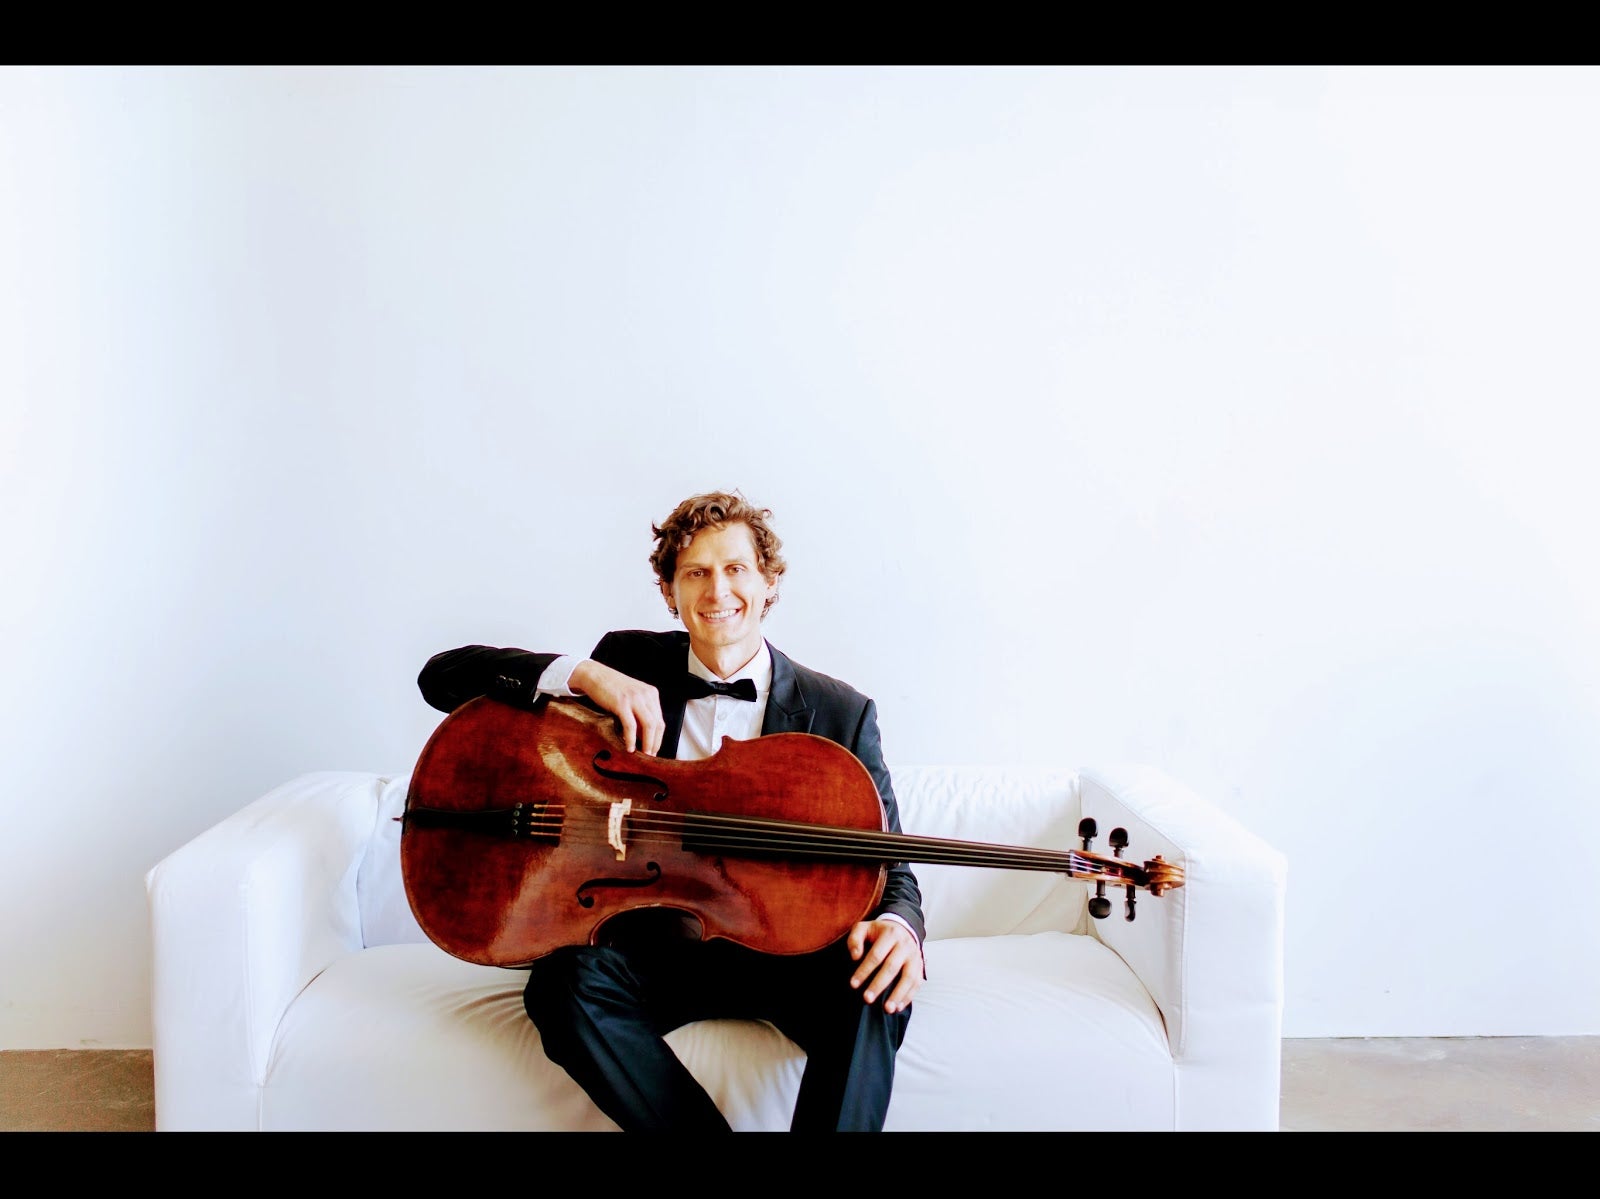 Christoph with his cello.